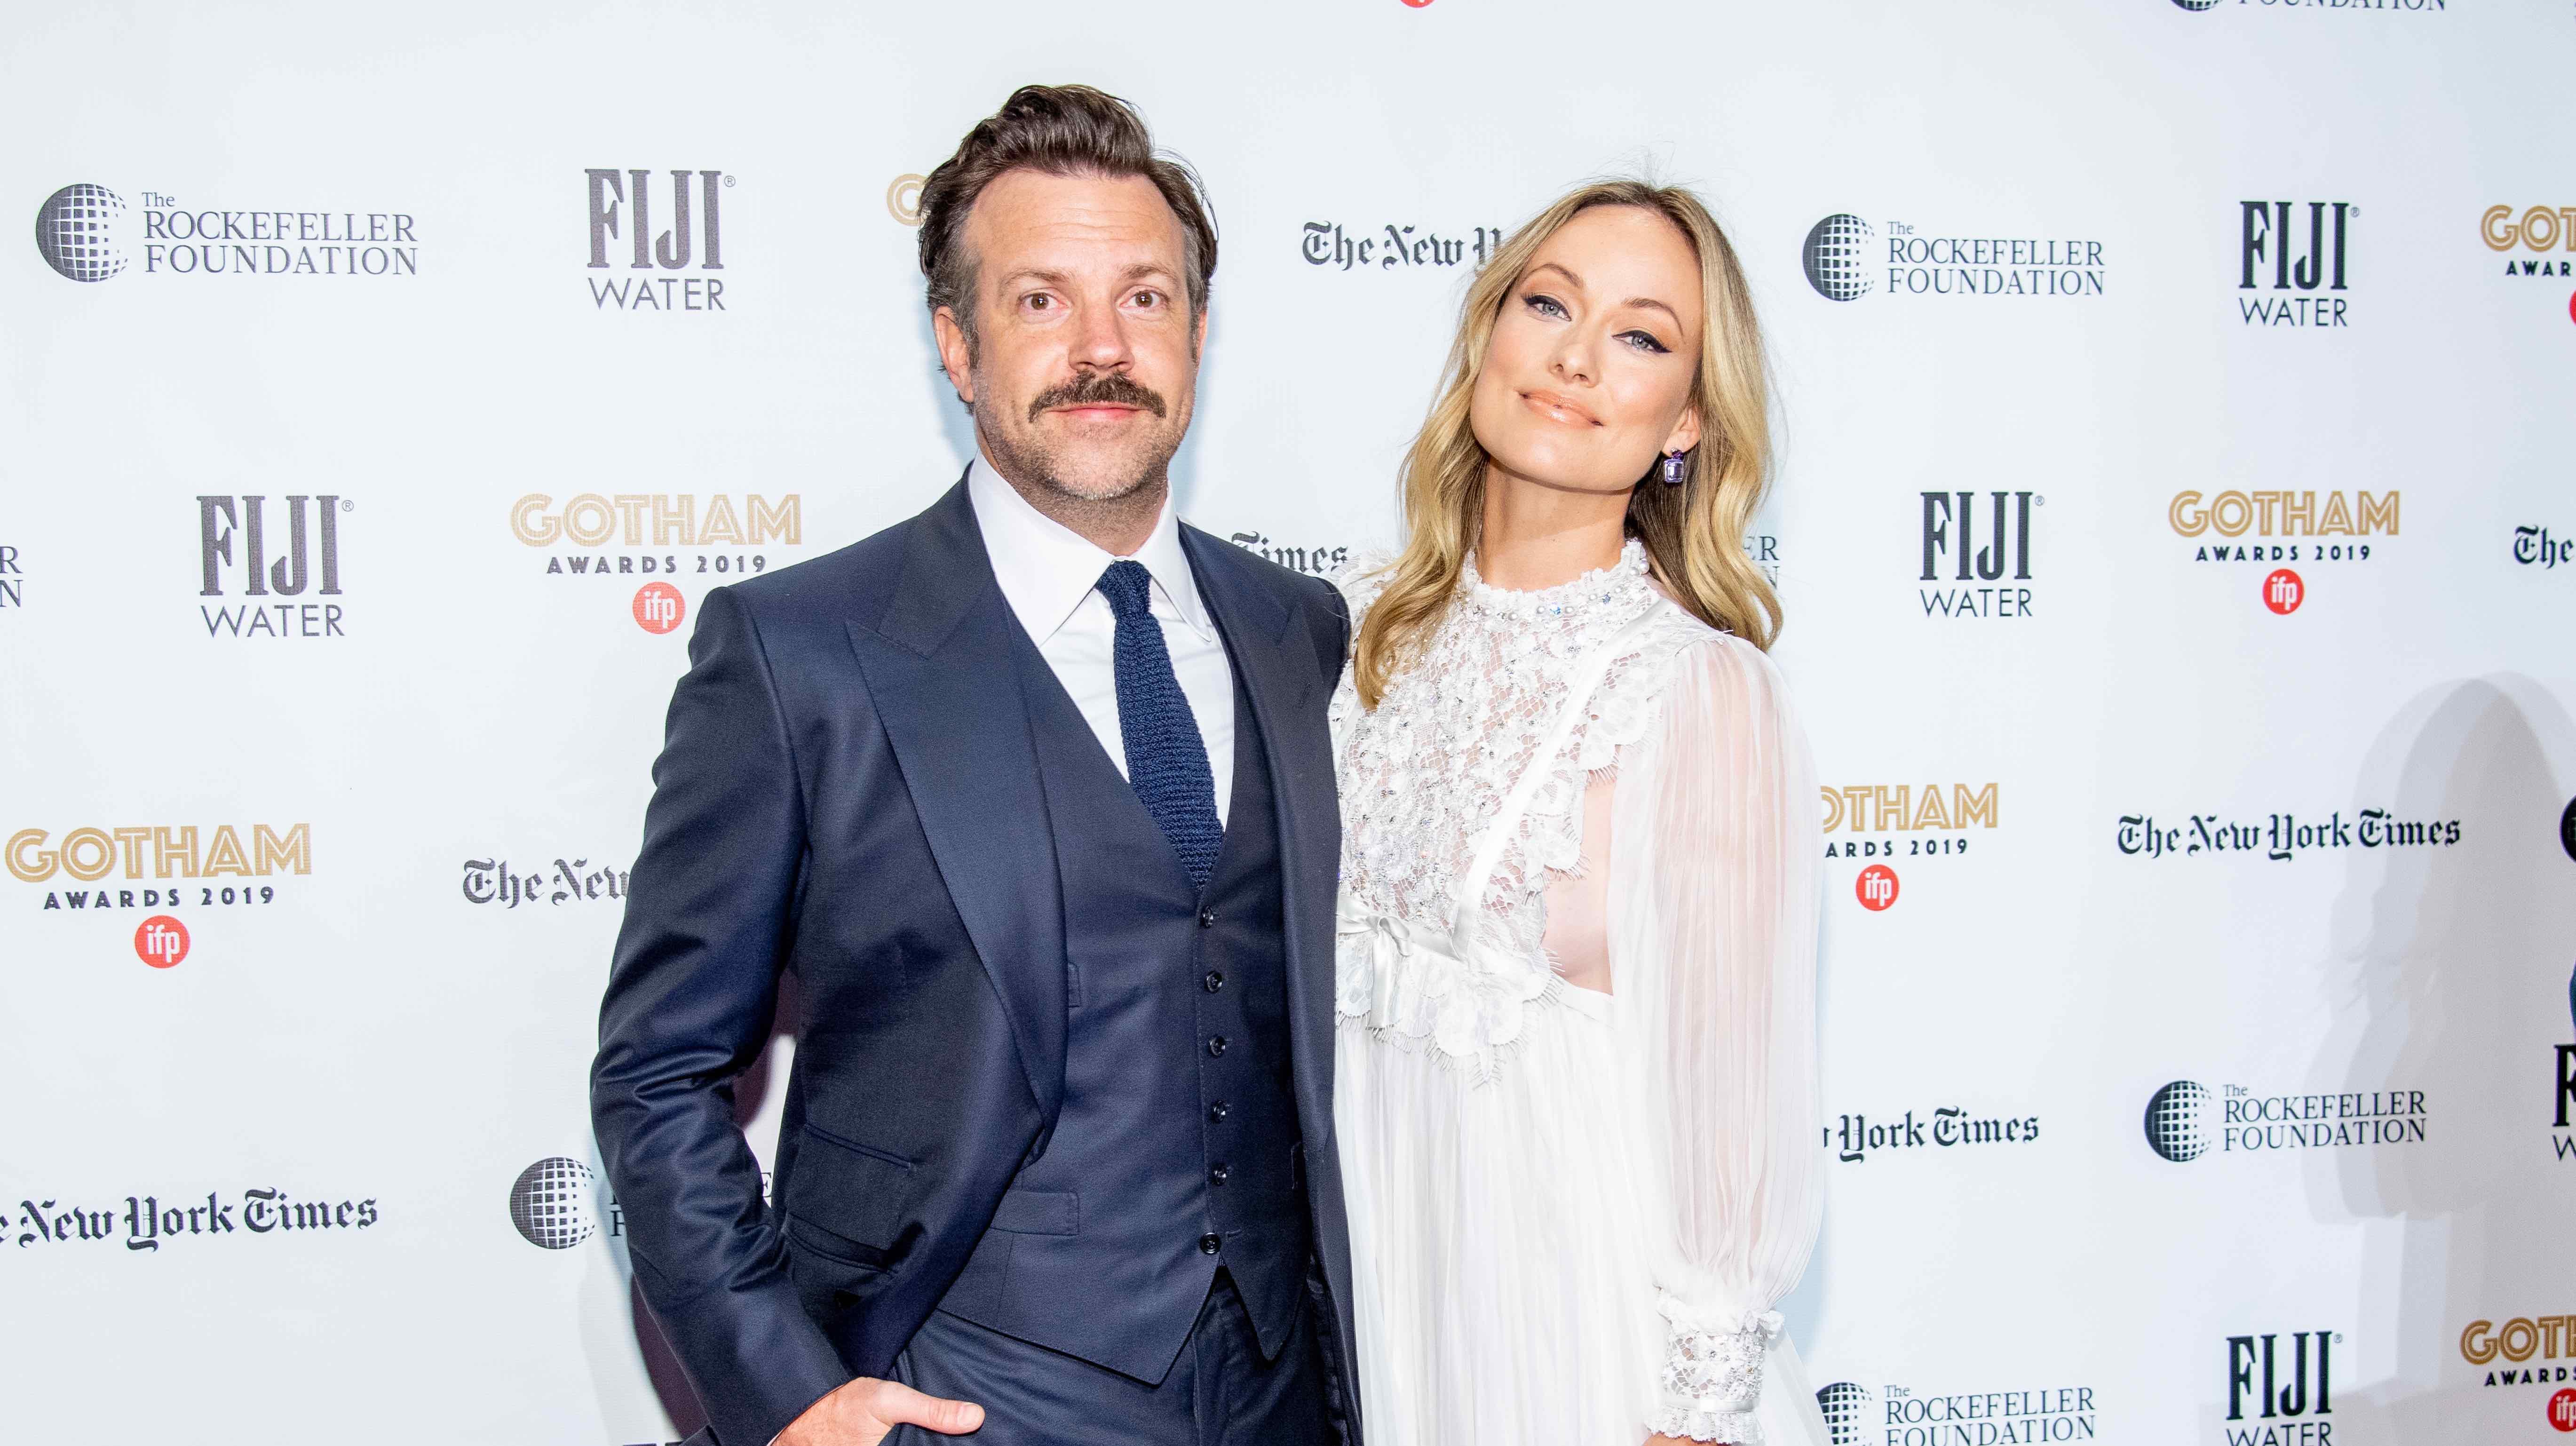 Jason Sudeikis and Olivia Wilde in December 2019.